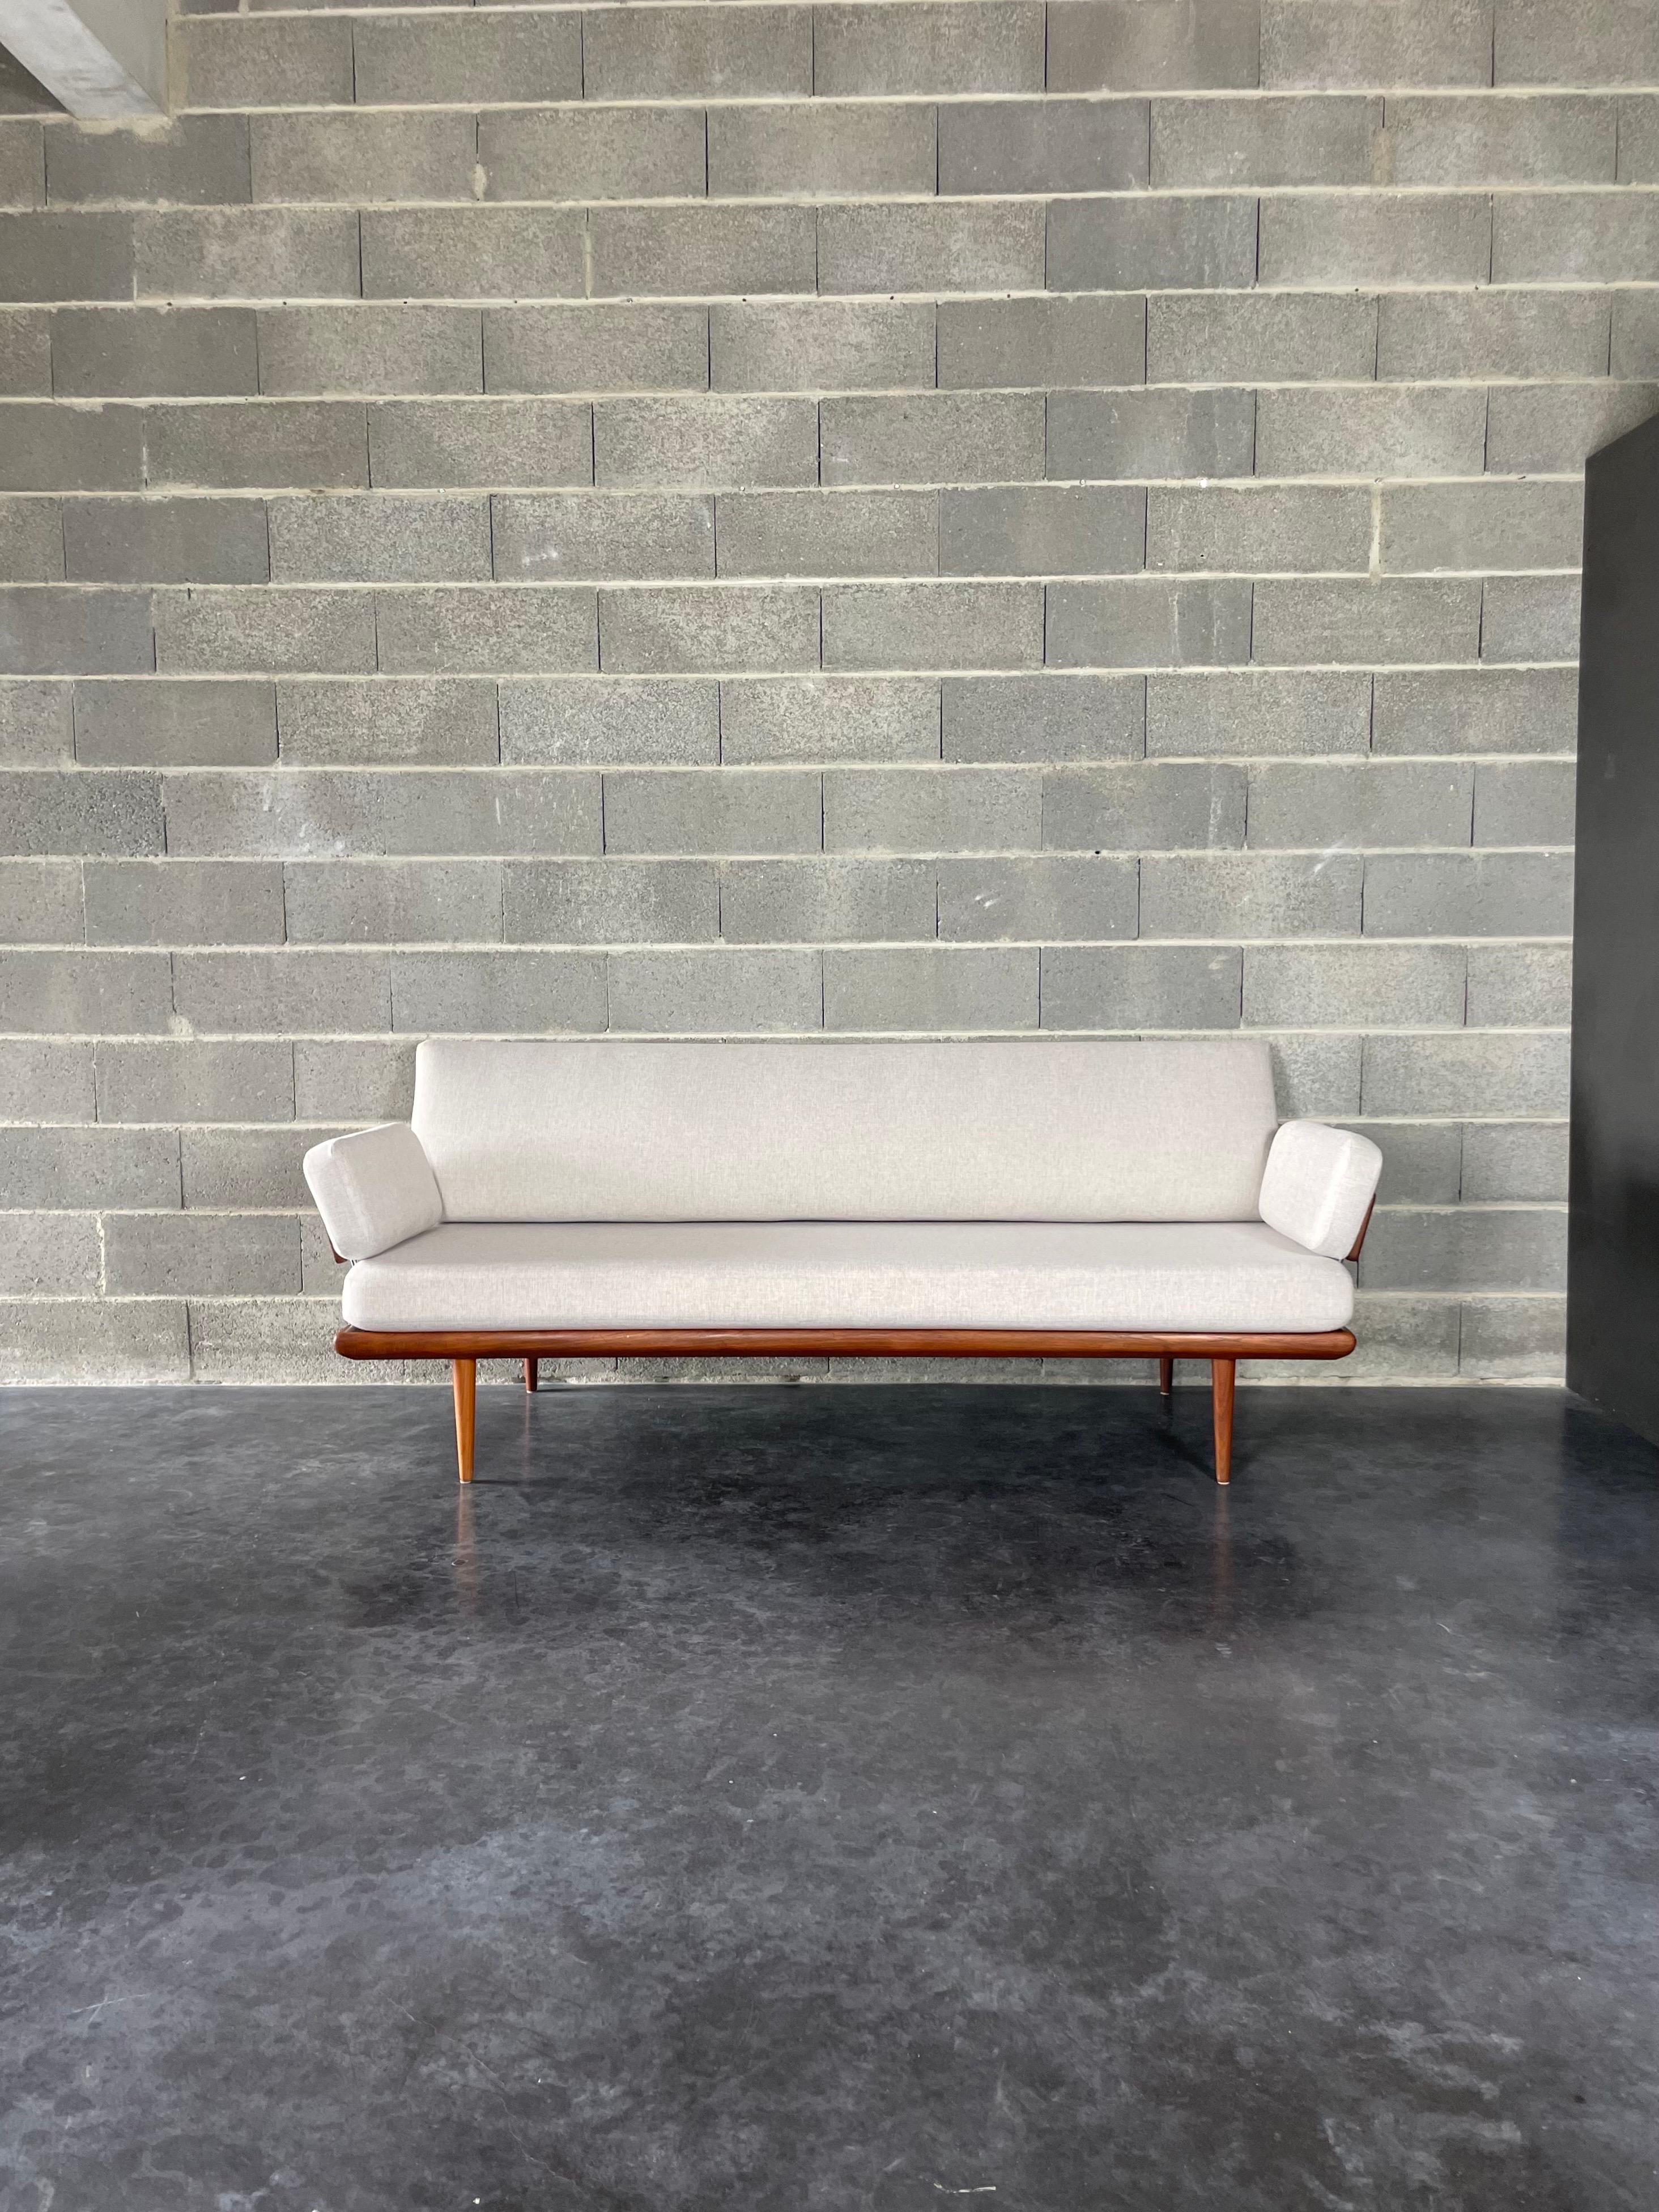 Mid-century 3 seater sofa and daybed designed by the Danish architects Peter Hvidt & Orla Mølgaard Nielsen. Produced in Denmark by France & Daverkosen during the 1950's.
This model Minerva belongs to the iconic design classics. It features a sleek